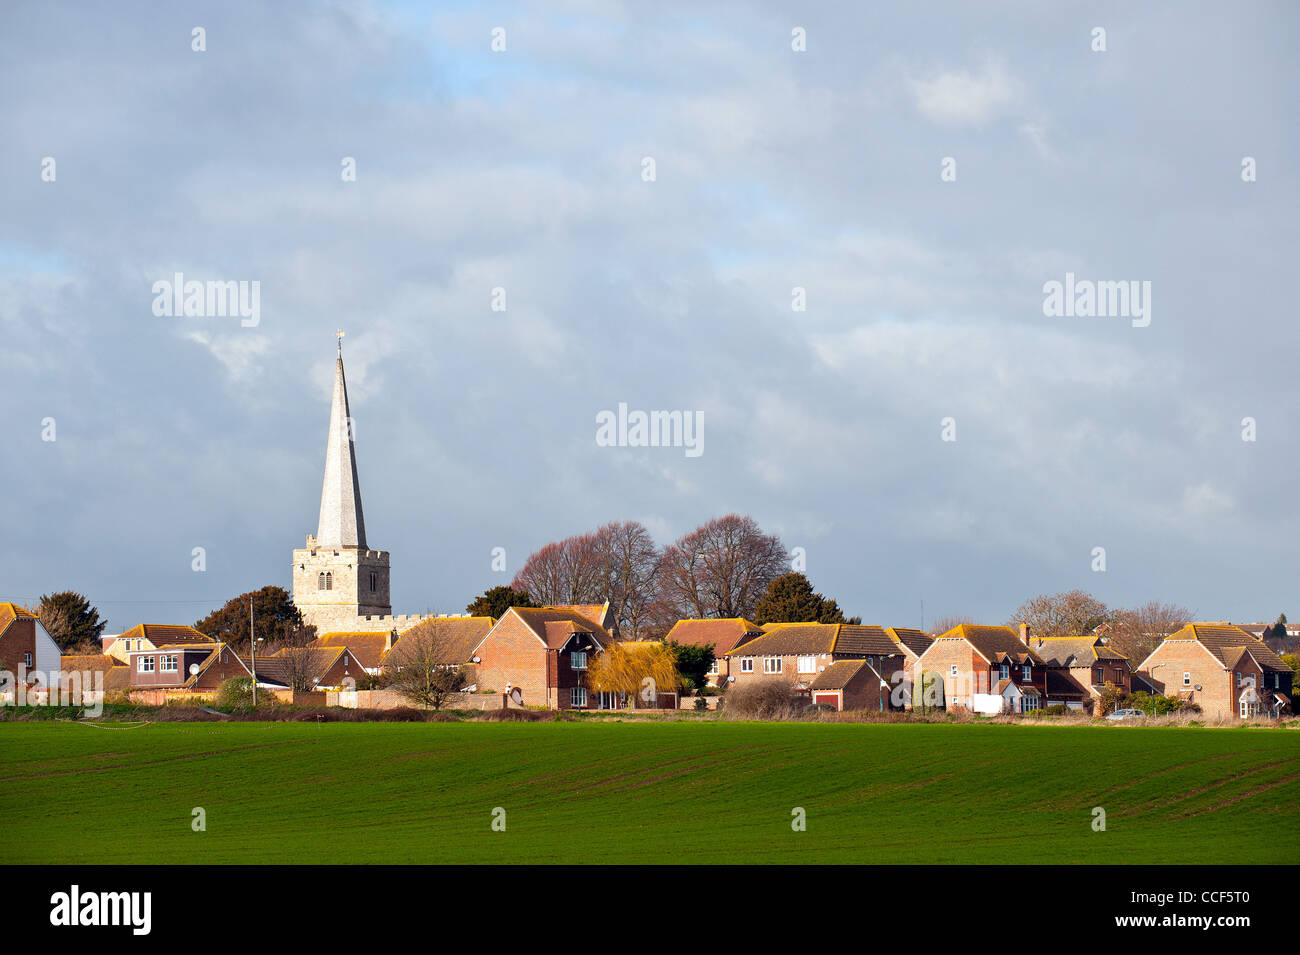 The steeple of a church in the village of Hoo St Werburgh in Kent in England in the UK. Stock Photo